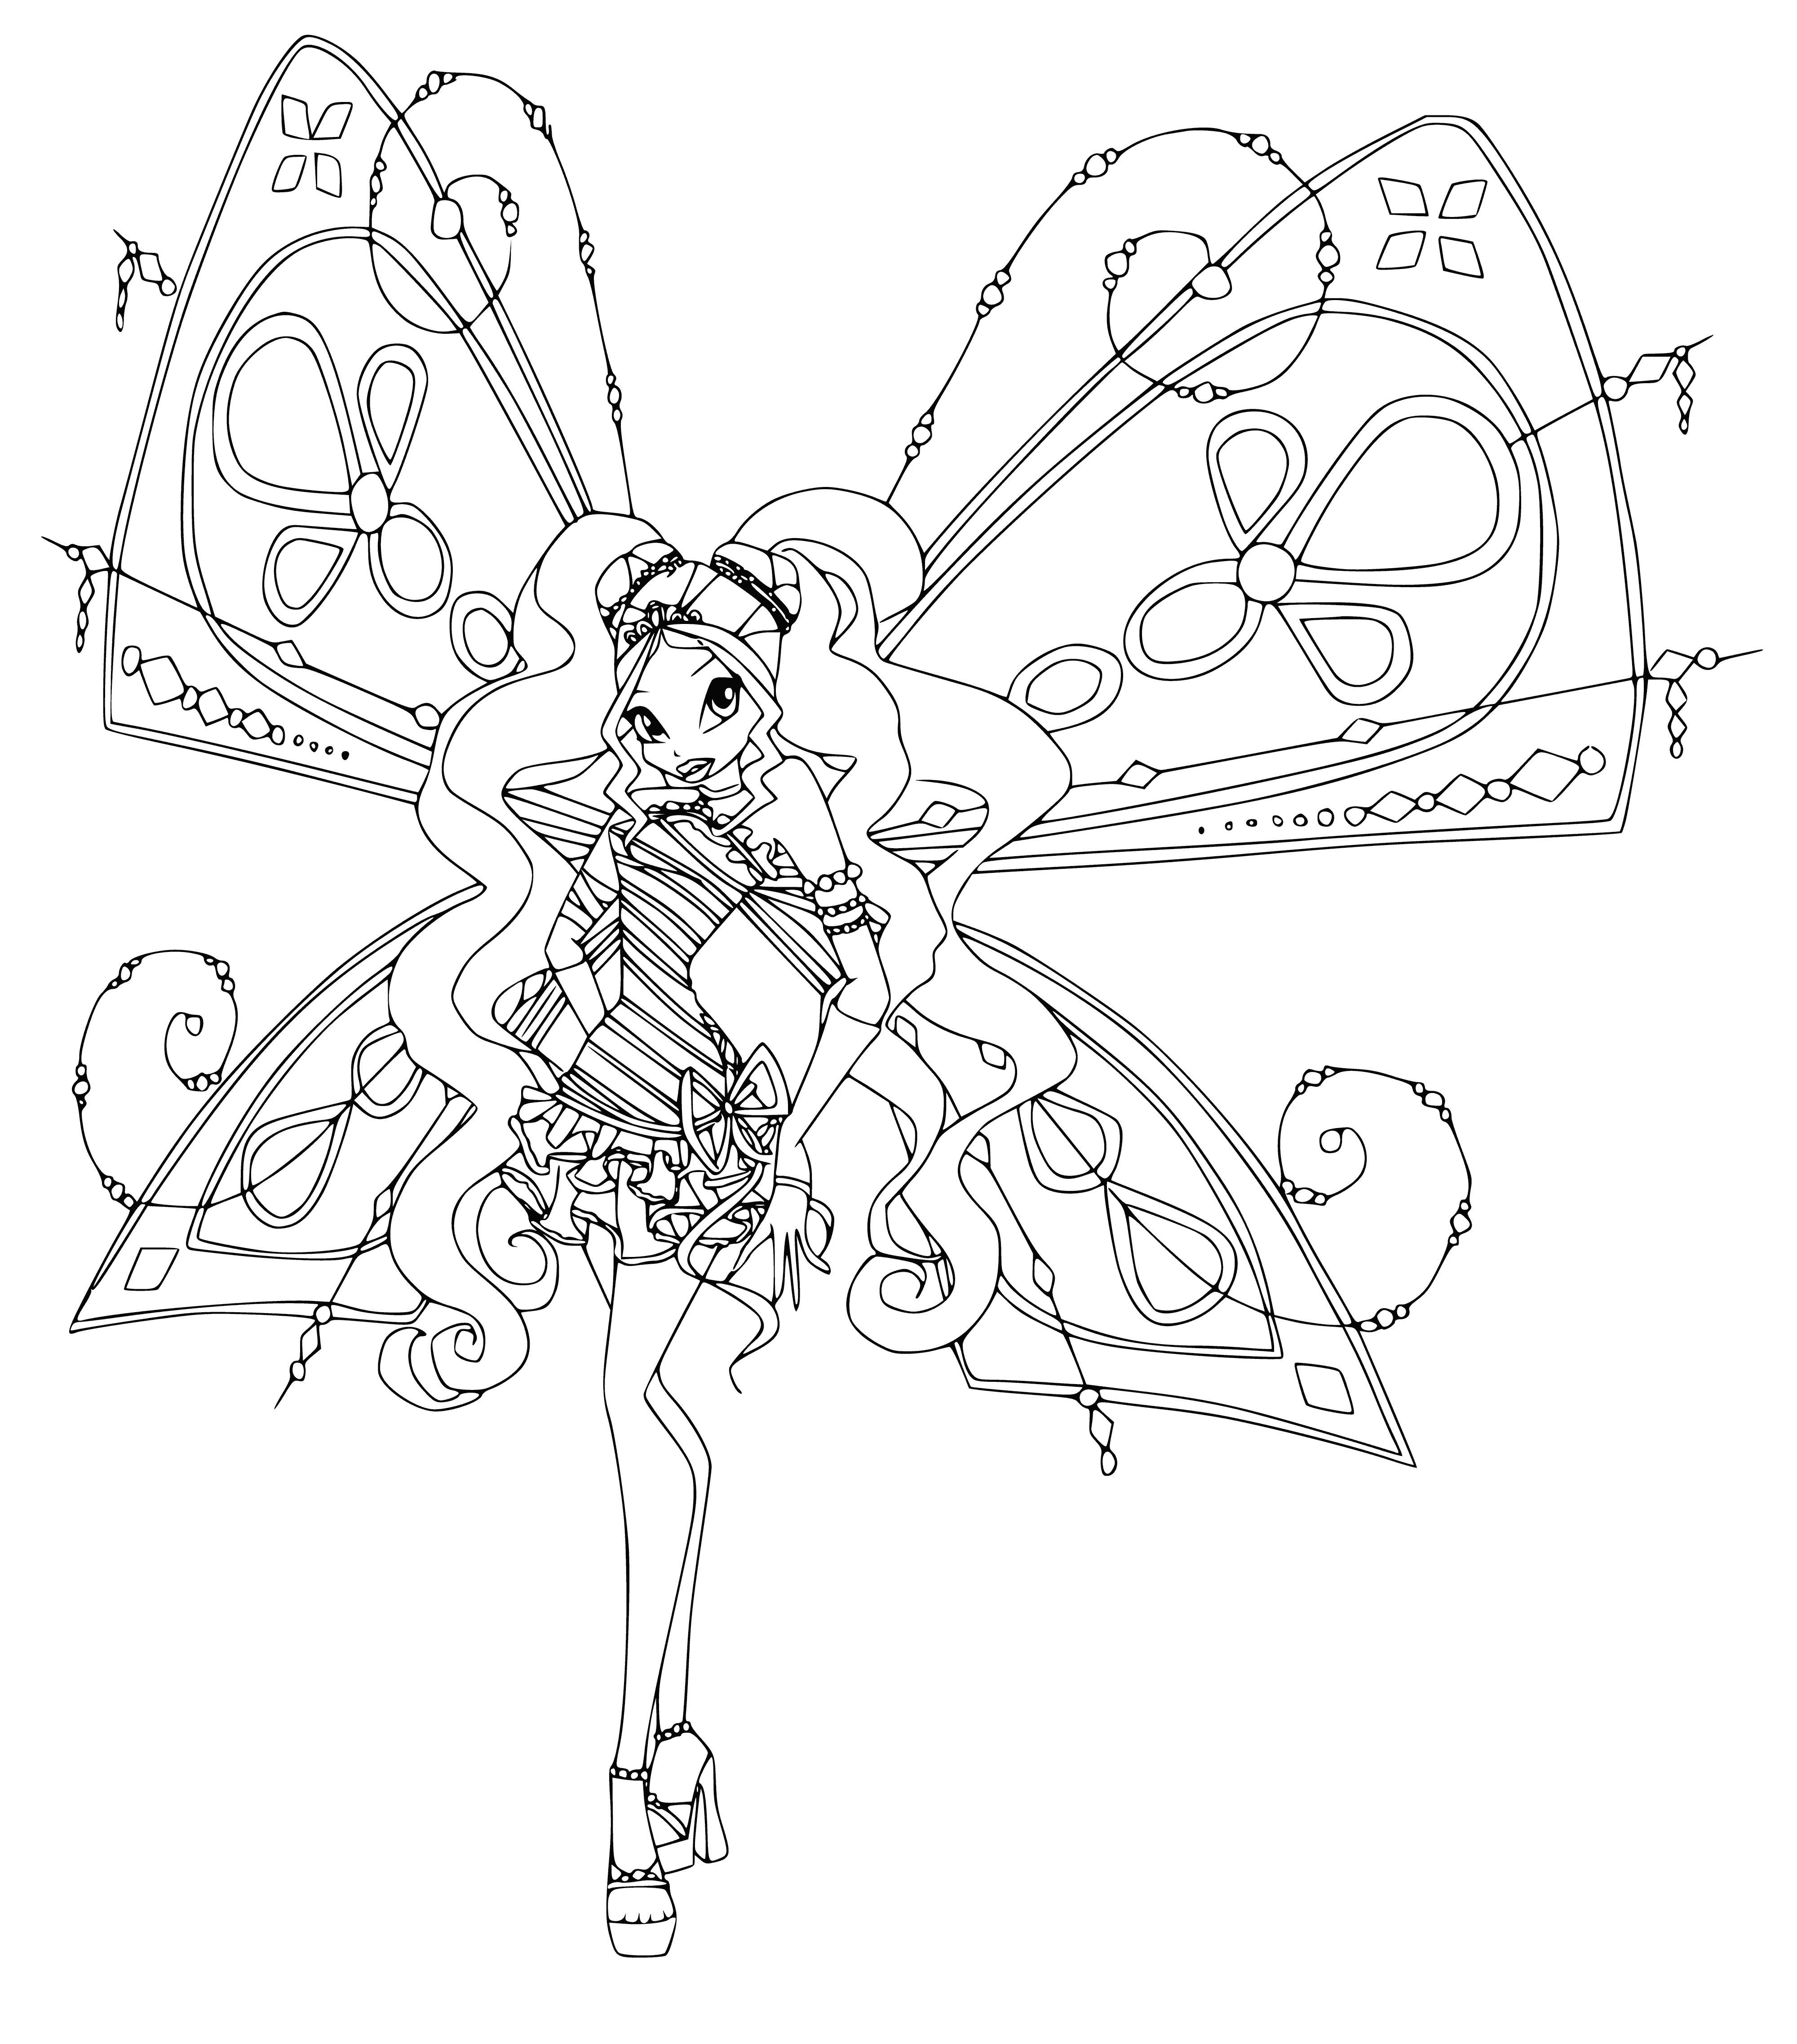 coloring page: Sorceress Leila stands ready for a battle, clad in black armor with skull and bones adornments. Her hands raised, one holds green energy - ready to cast her spell.